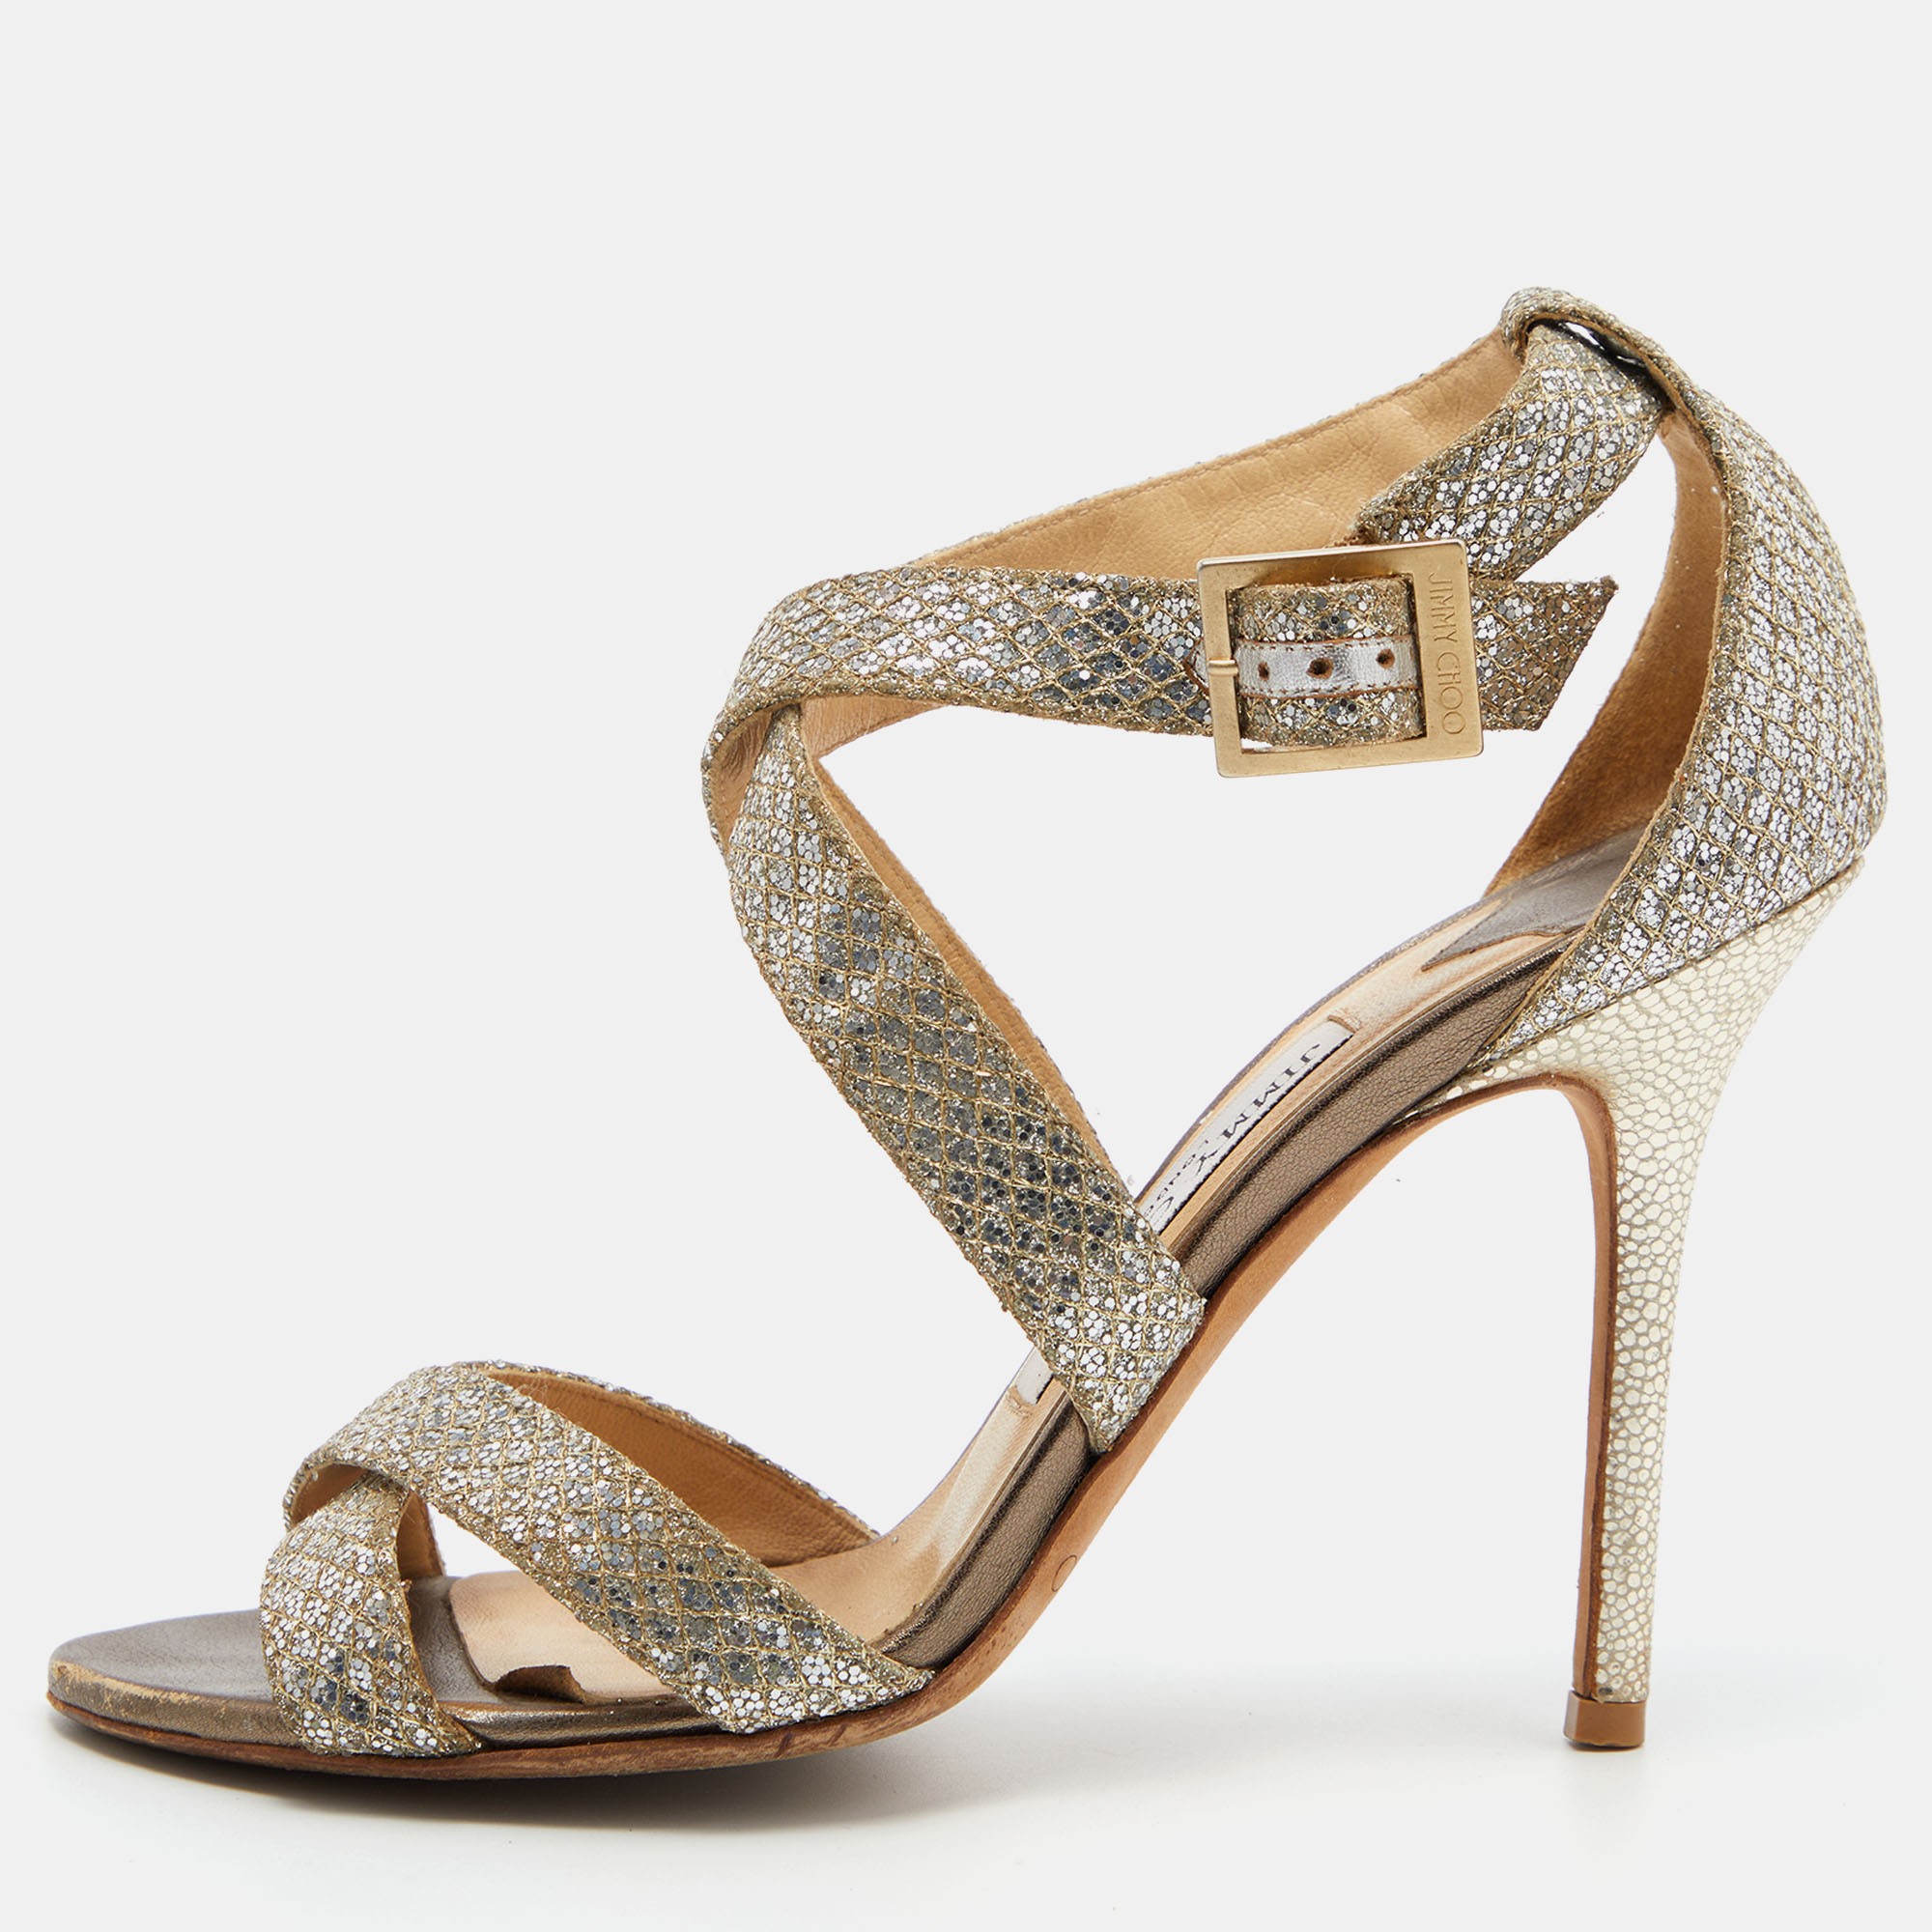 Jimmy Choo Gold Glitter Louise Strappy Sandals Size 38